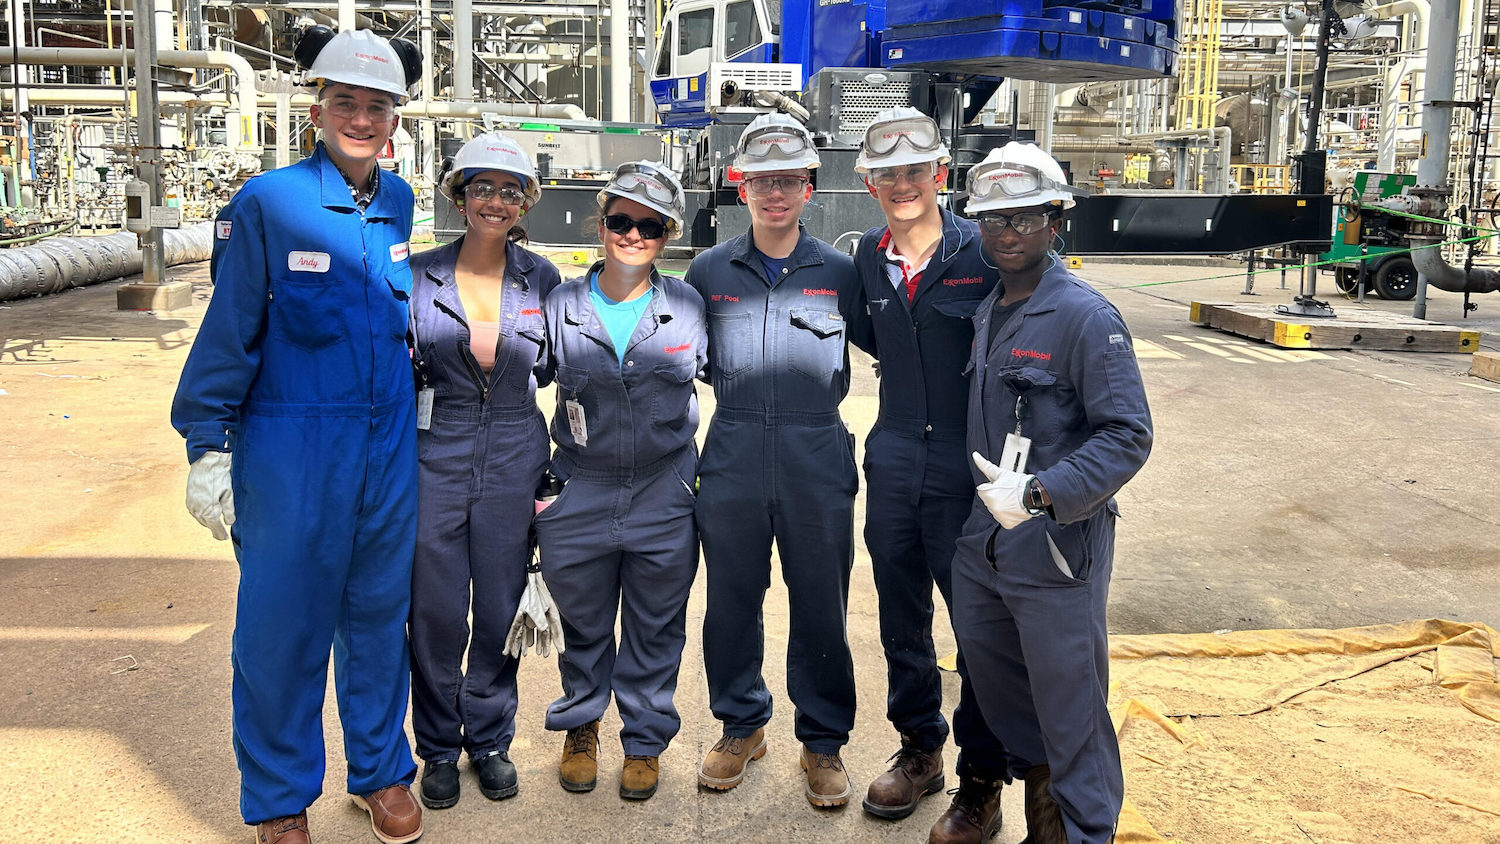 Tyler Void '23 (far right) at the site of his ExxonMobil internship.